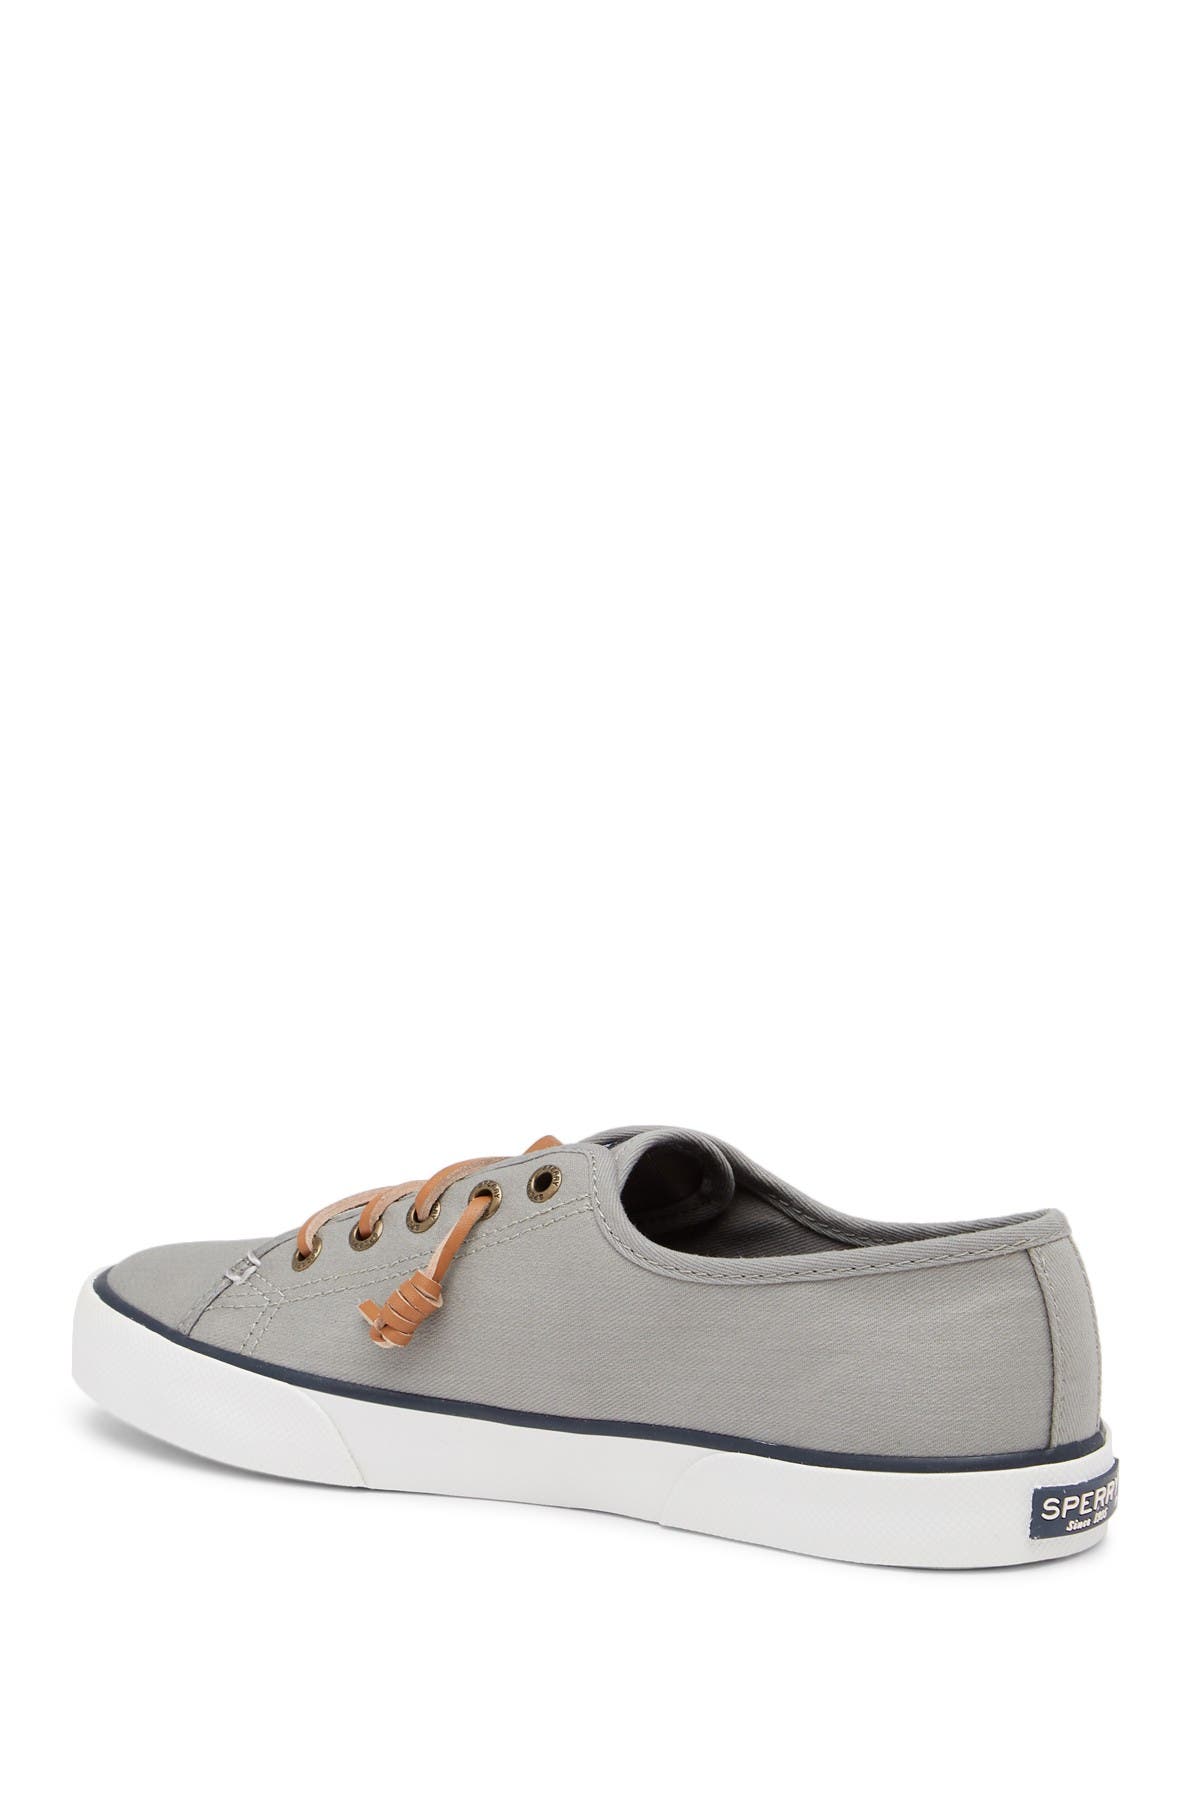 sperry sts95729